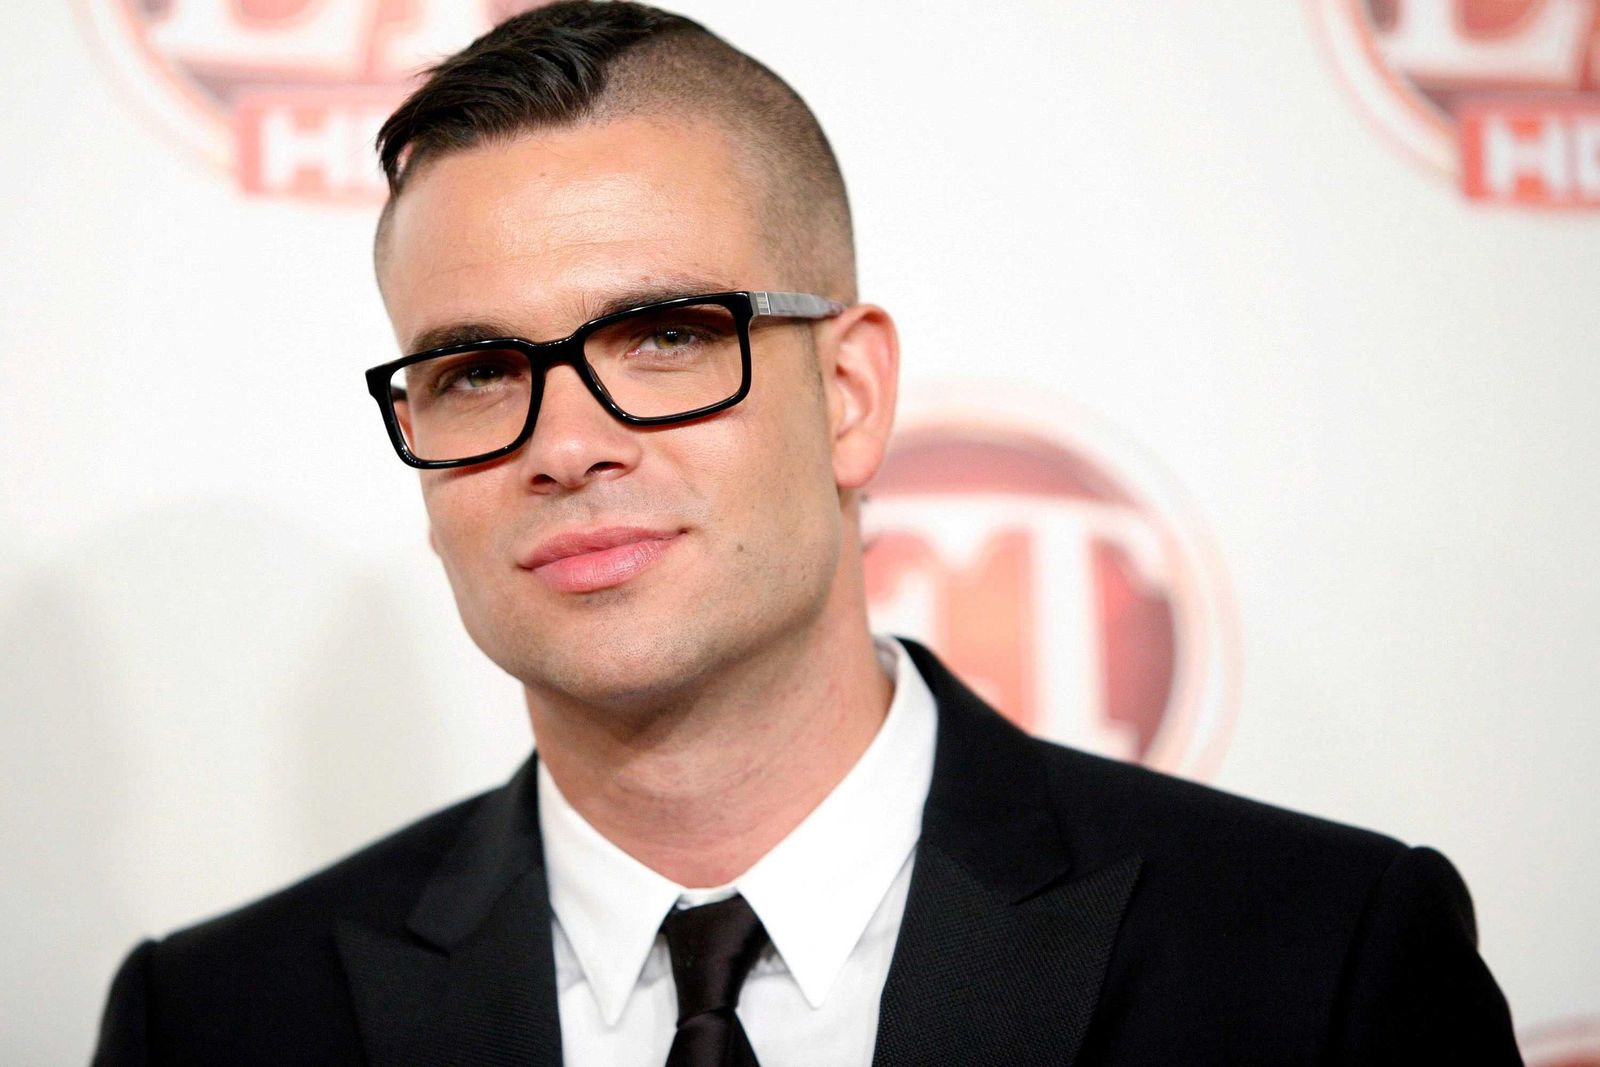 'Over 50,000 images of child pornography: The dark side of 'Glee' Star Mark Salling's life before suicide